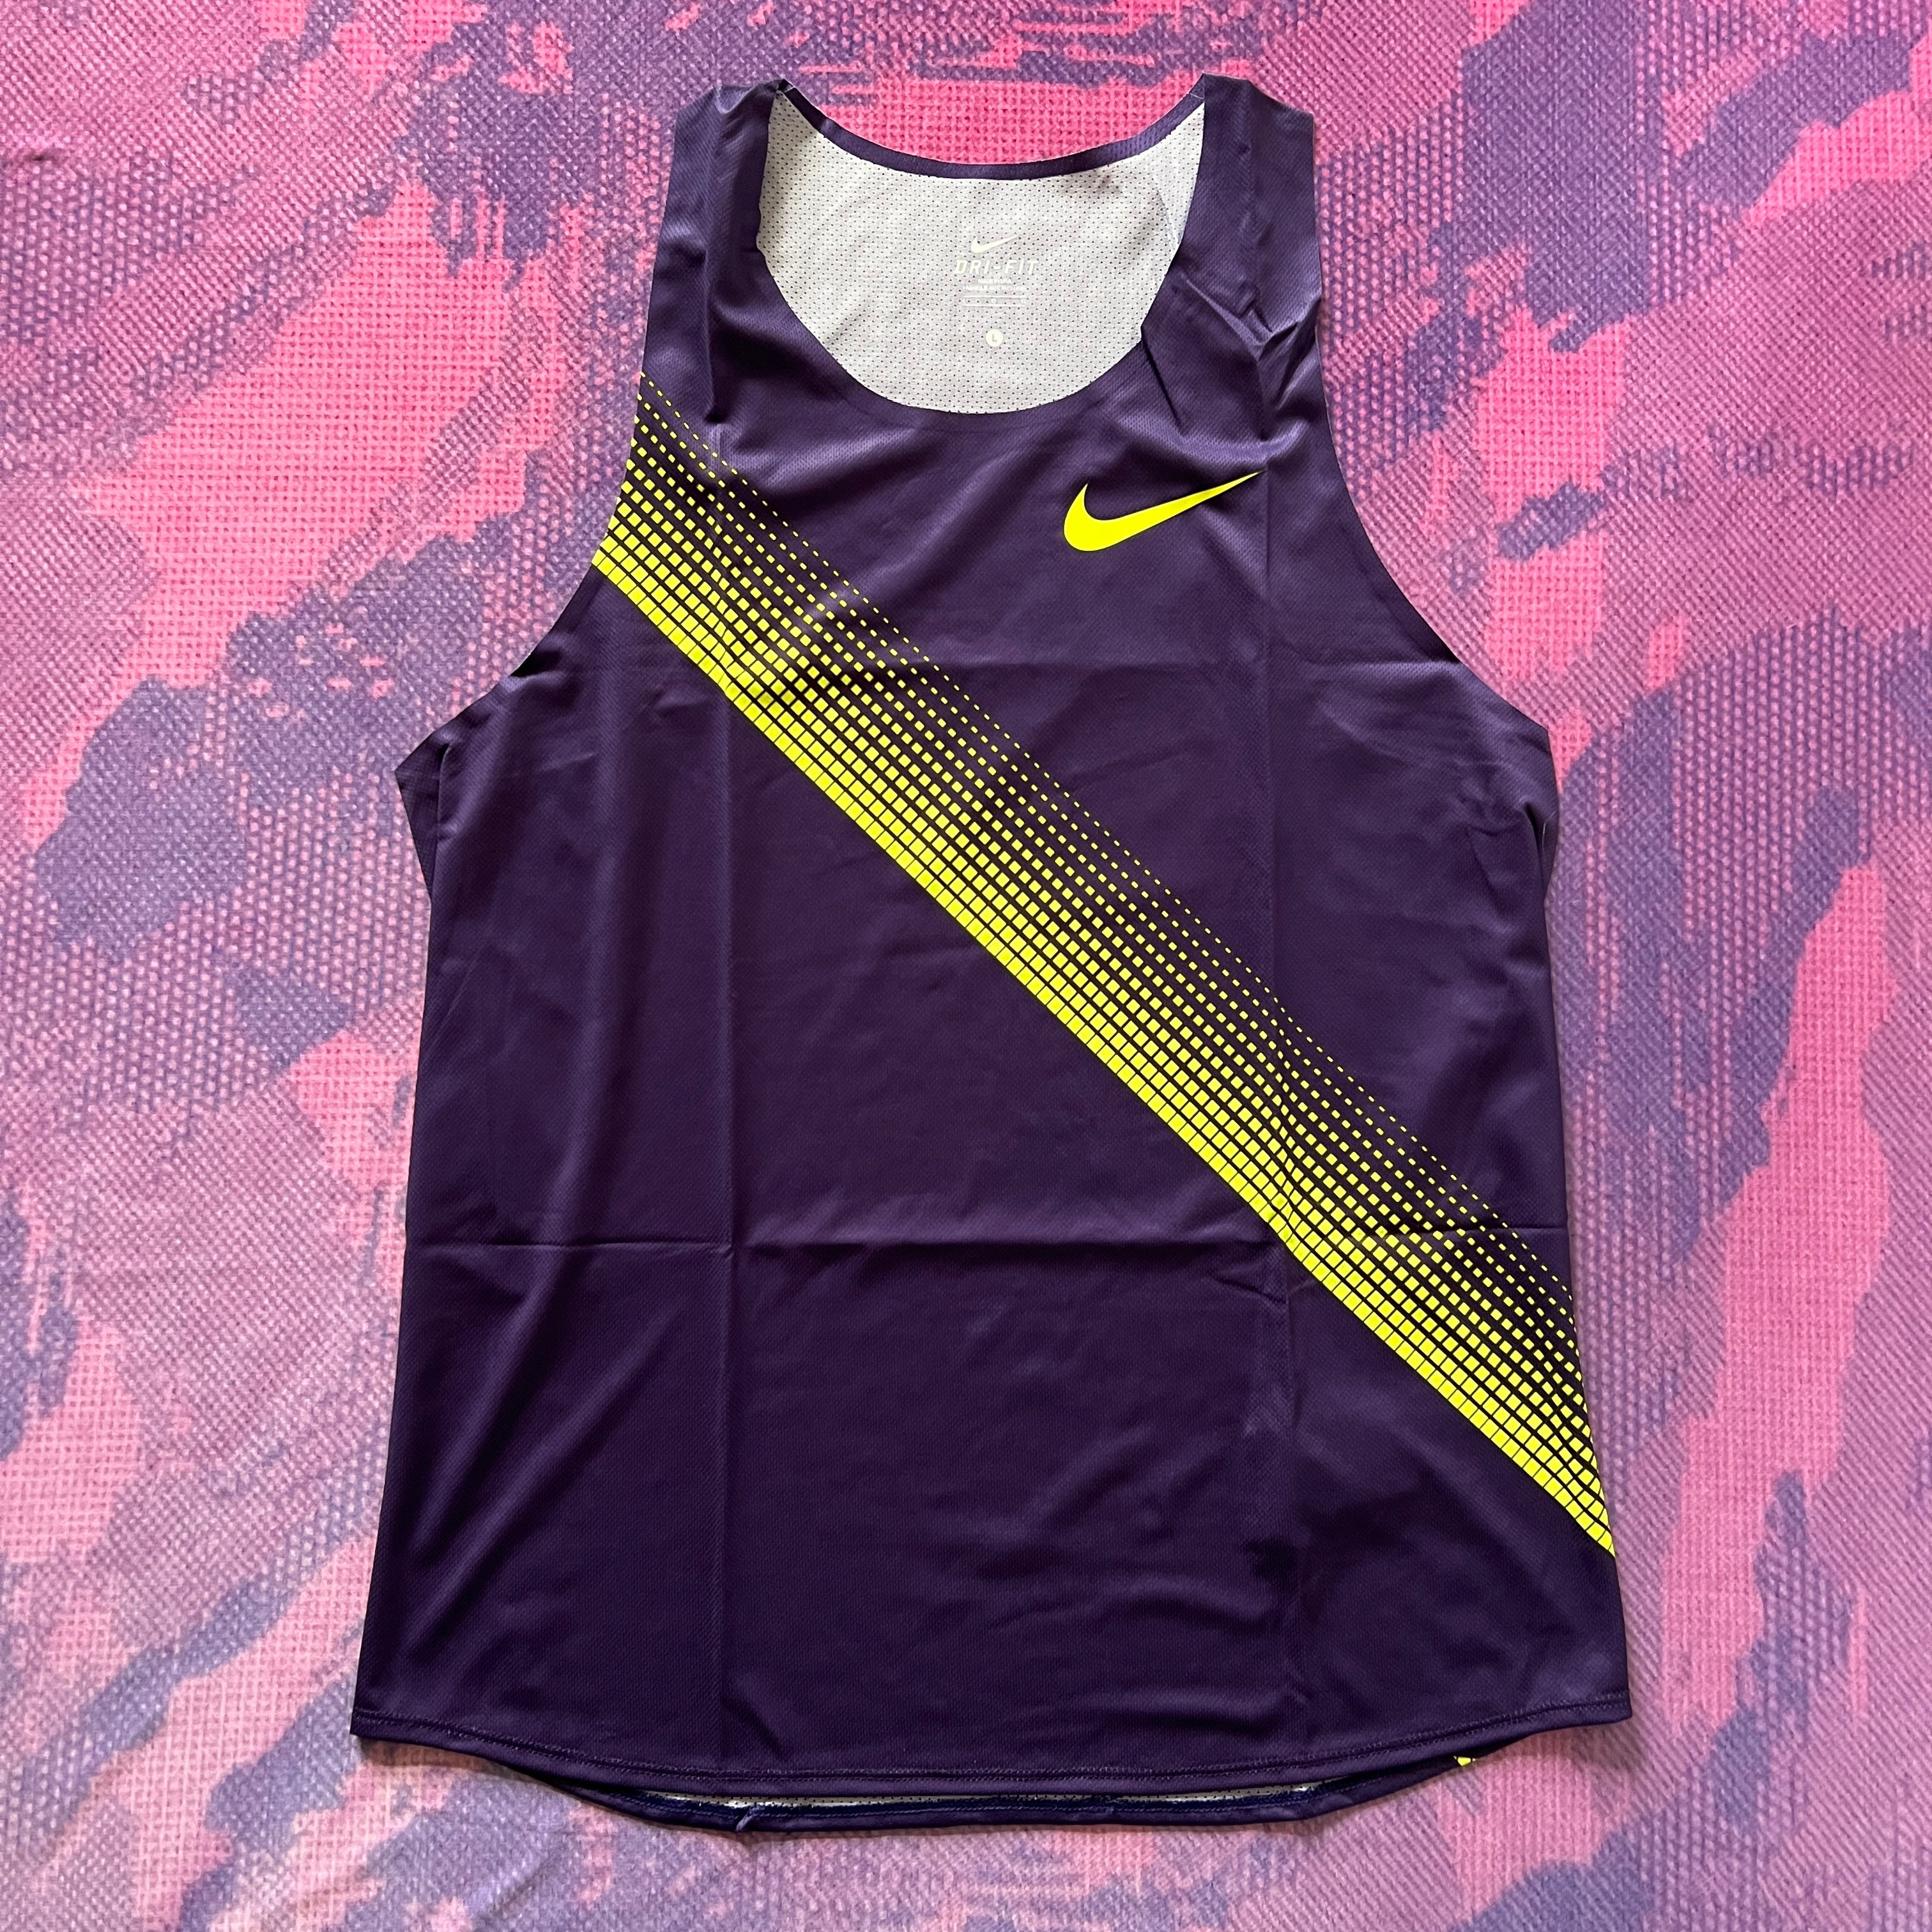 2010 Nike Pro Distance (L) – Lap Track and Field